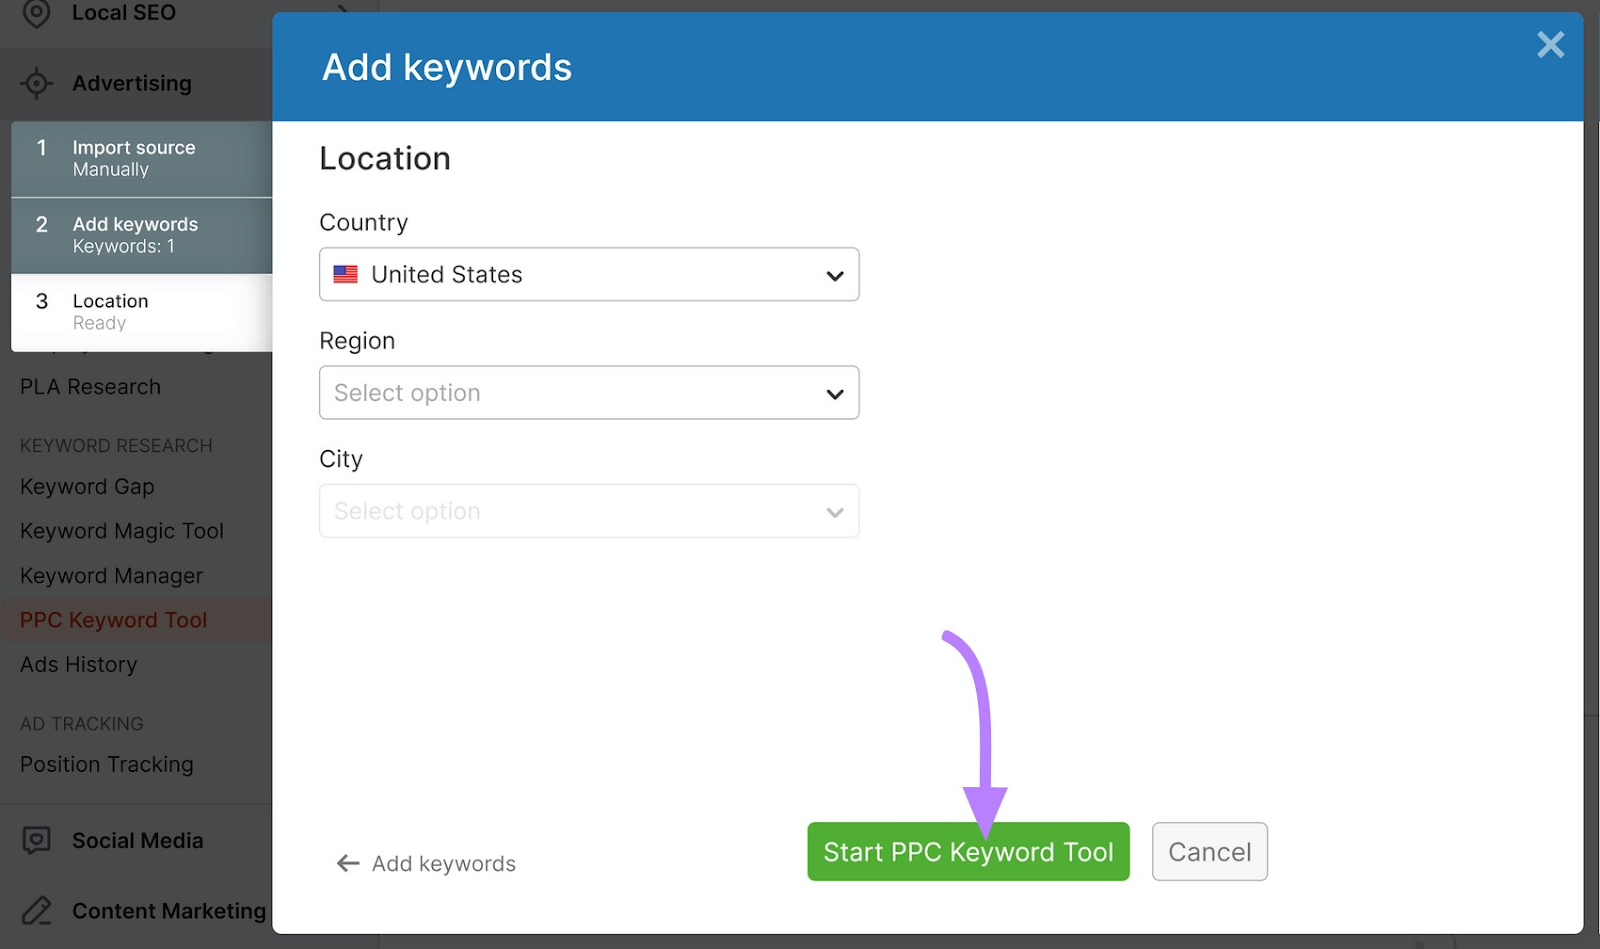 “Start PPC Keyword Tool” button highlighted